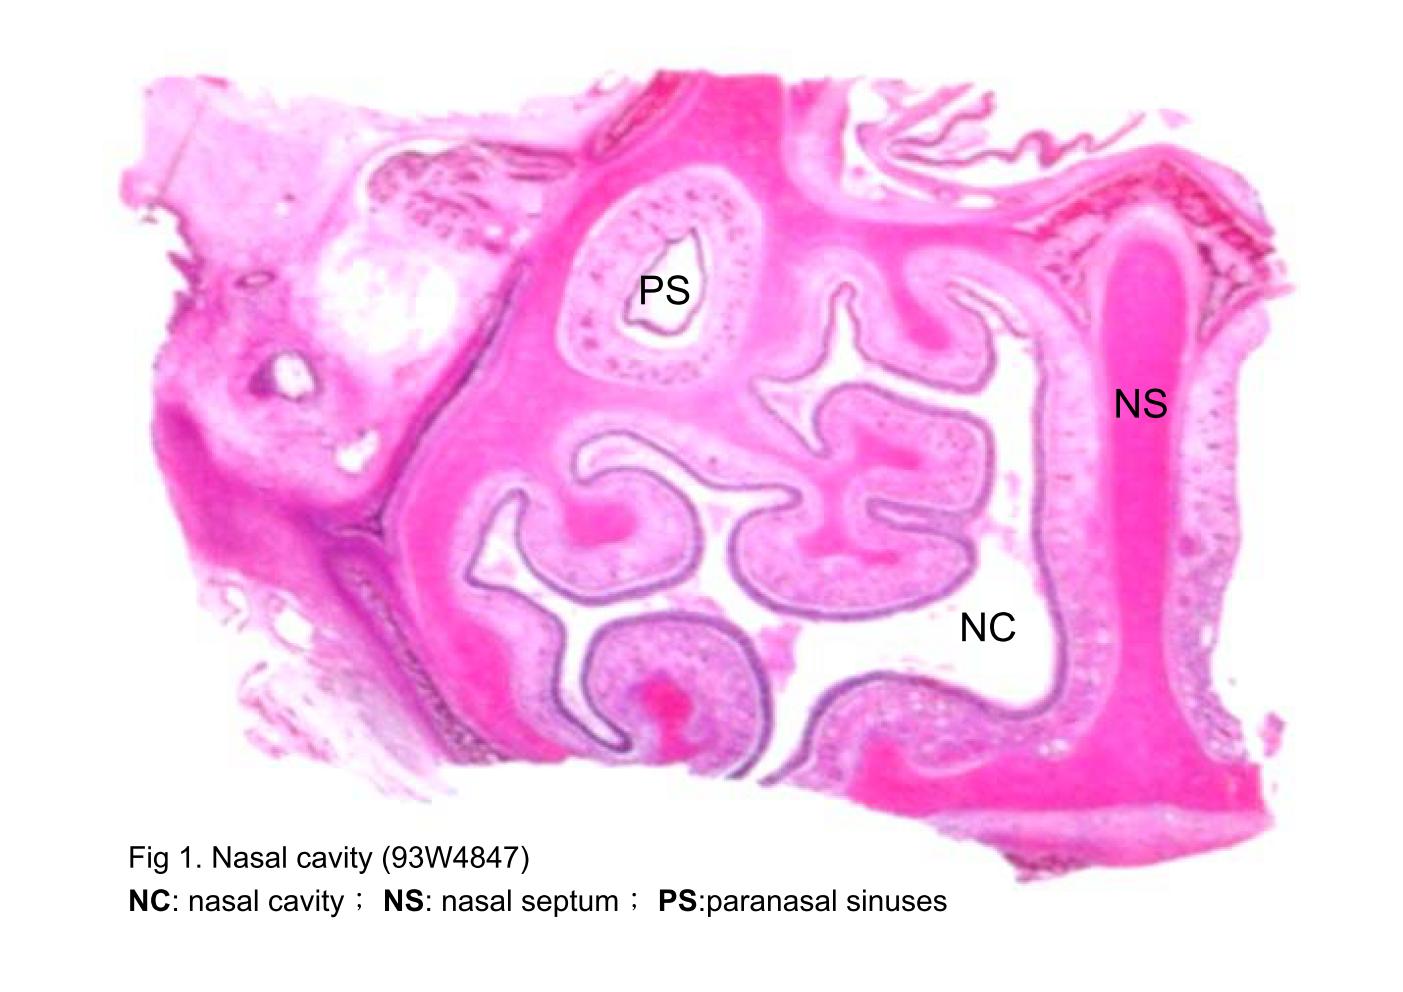 block9_05.jpg - Fig 1. Nasal cavity (93W4847)The nose is subdivided into two nasal cavities (NC) by the cartilaginous the nasal septum (NS). The nasal cavities and paranasal sinuses (PS) are lined by respiratory mucosa.